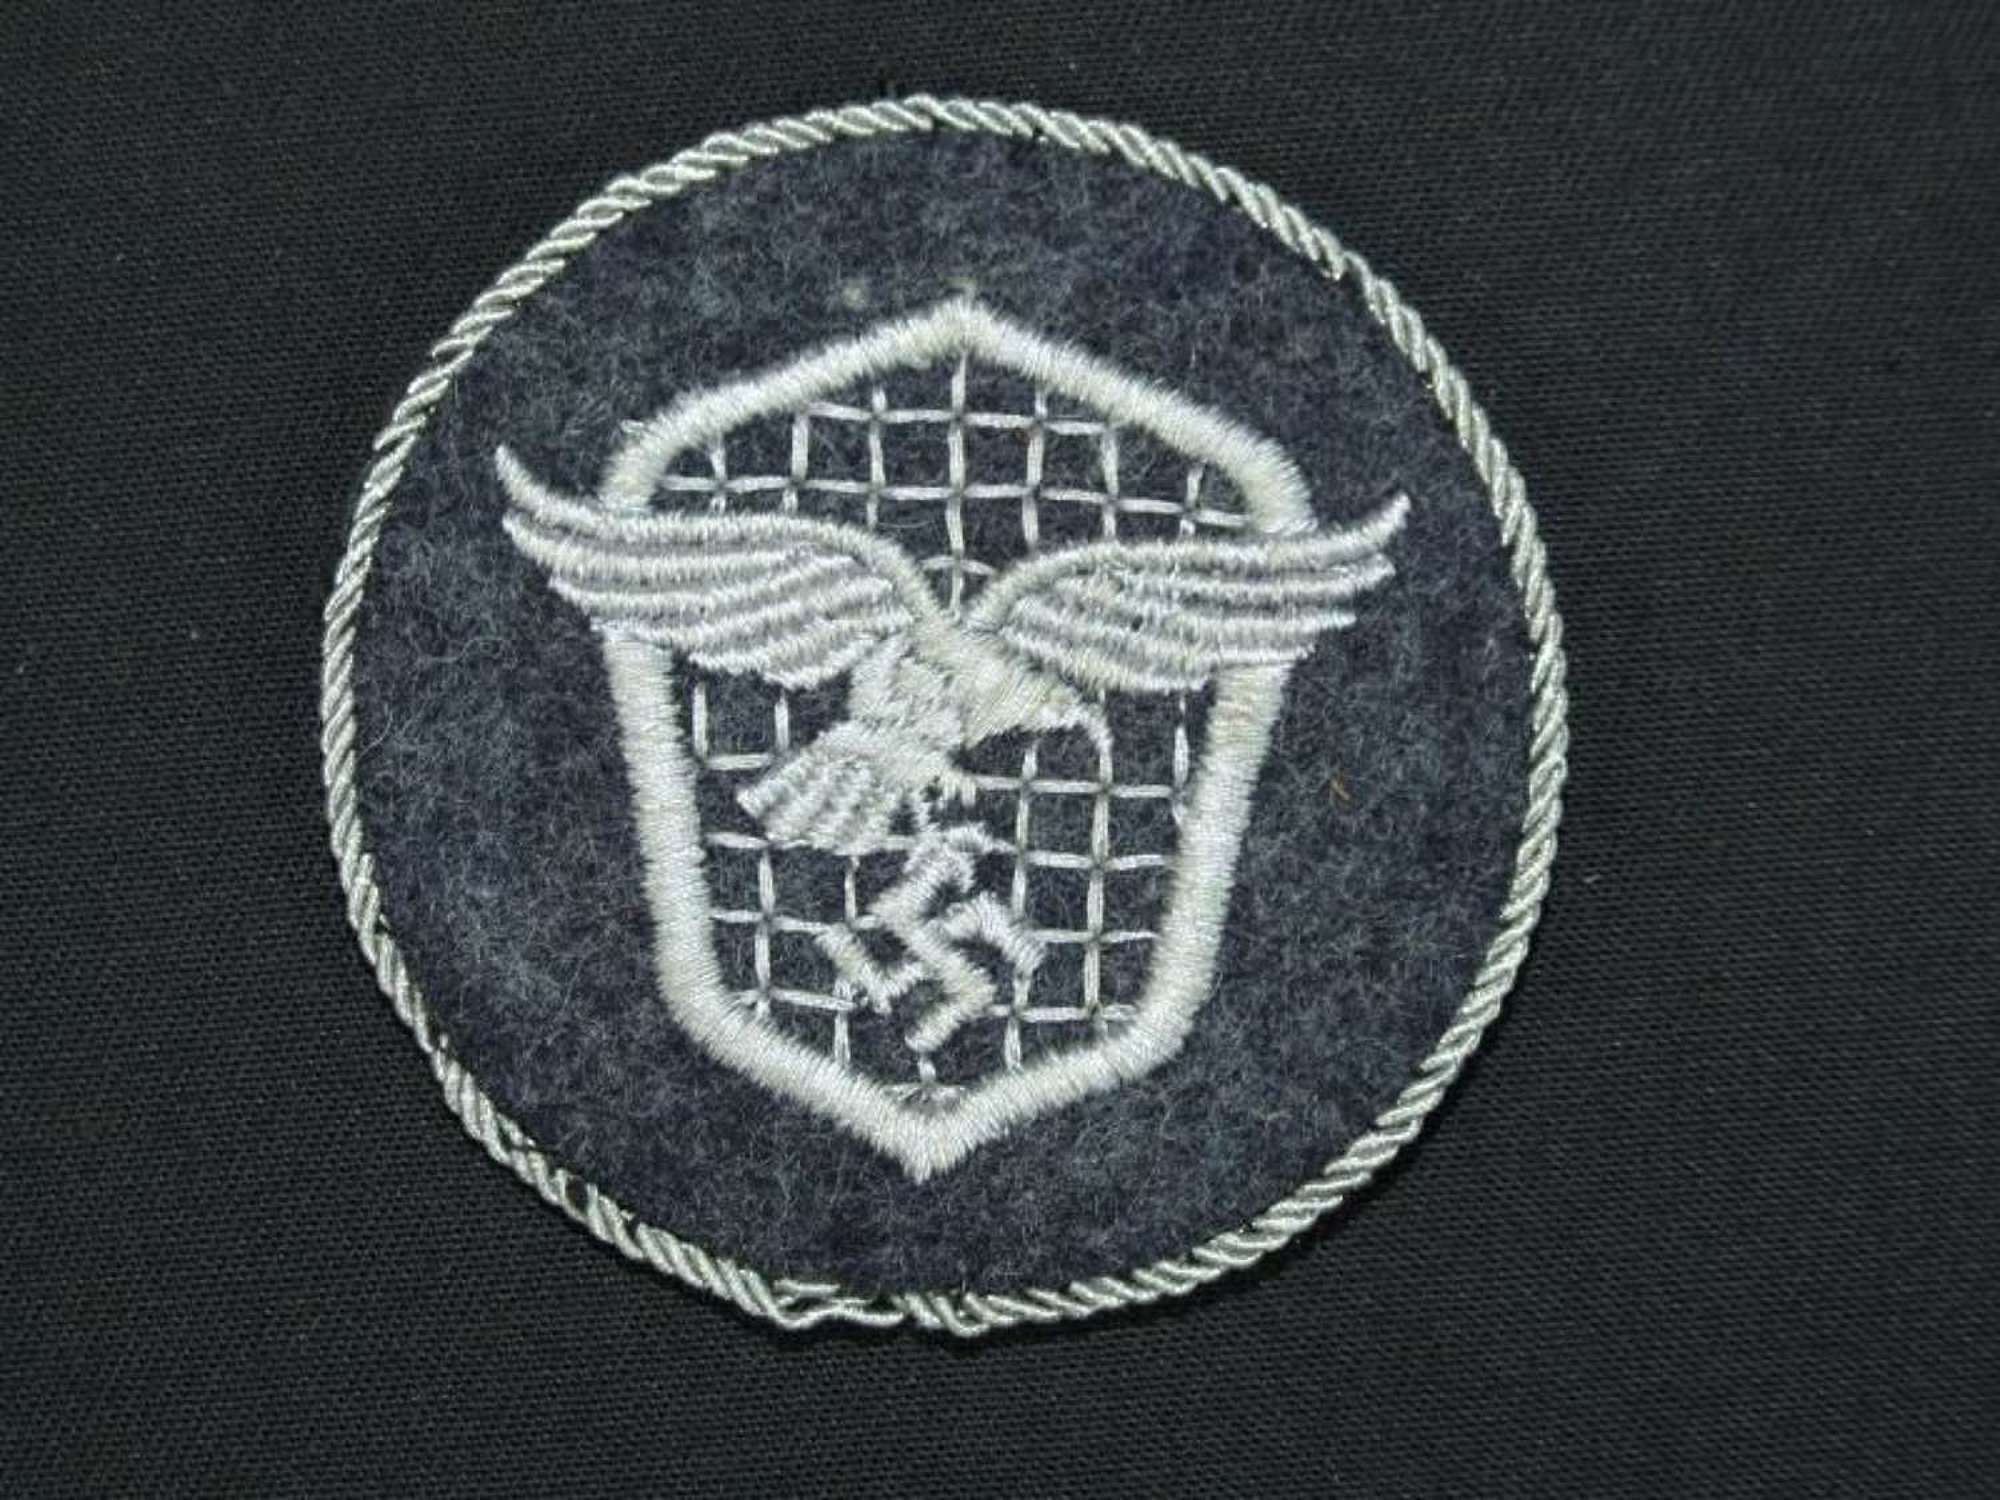 Luftwaffe Trade Specialty Badge - Motor Vehicle Driver